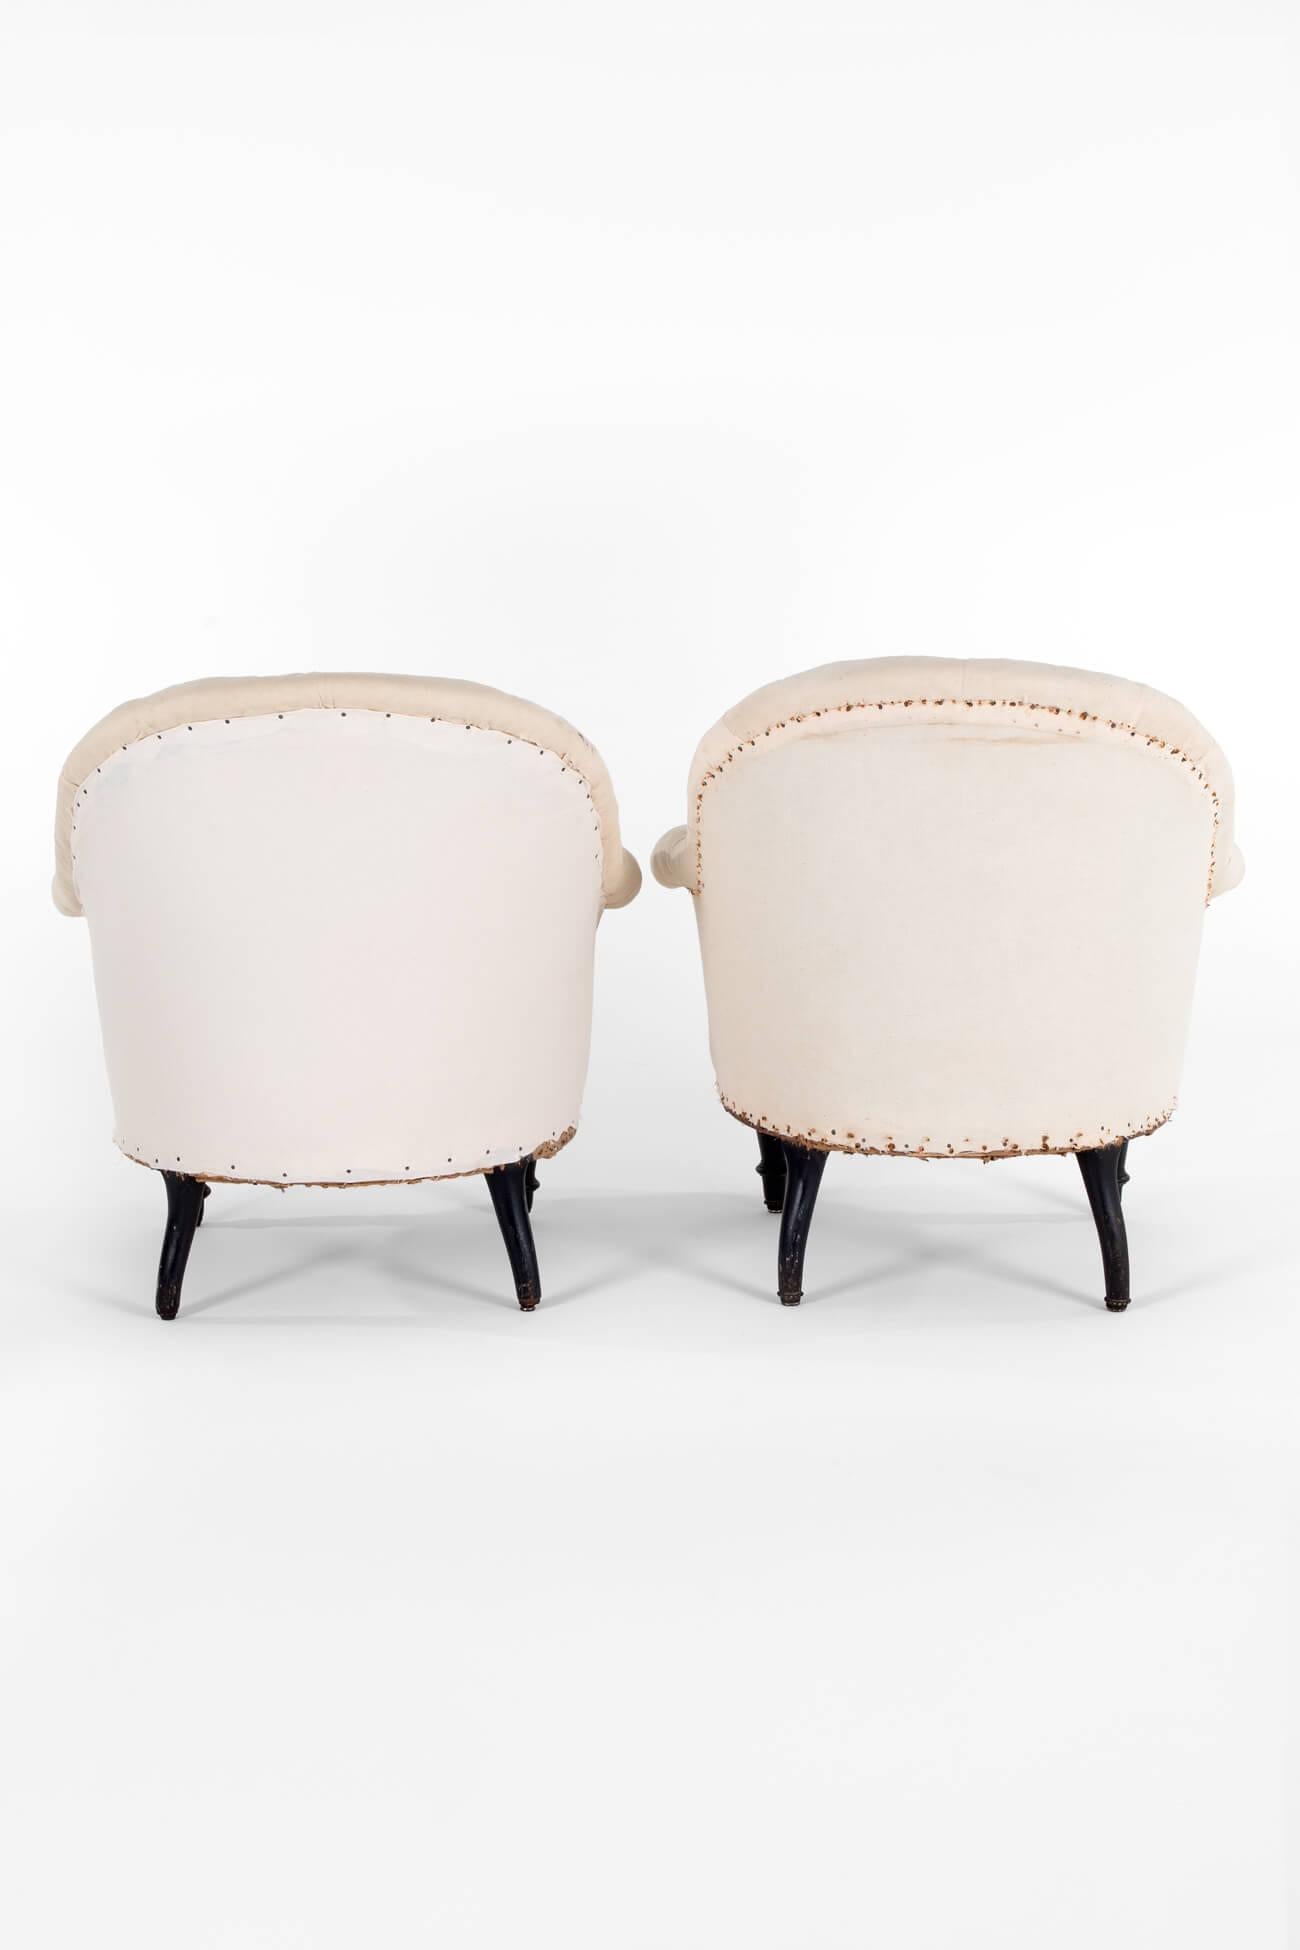 Napoleon III Pair of French Button Back Armchairs For Sale